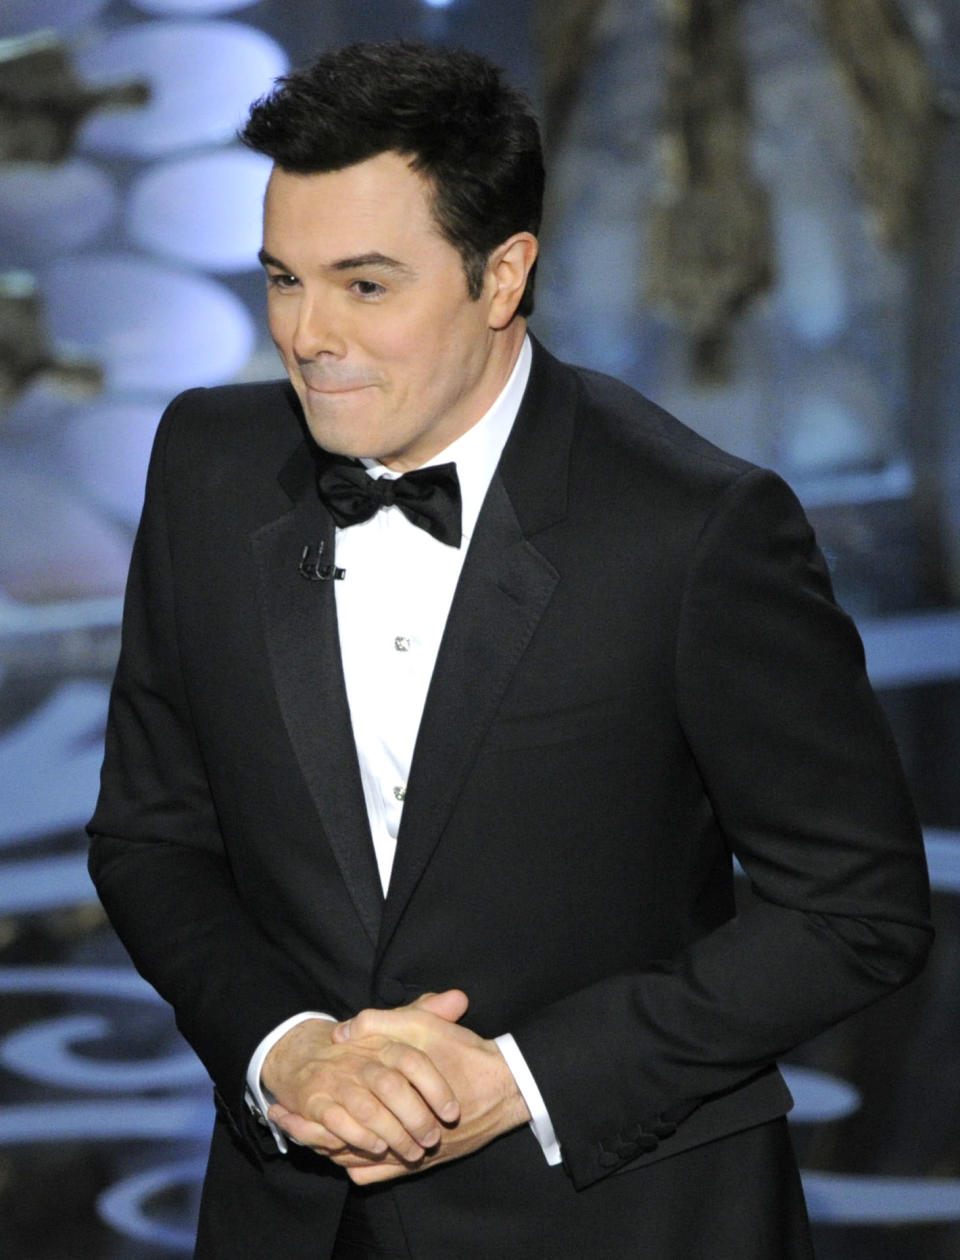 Host Seth MacFarlane performs onstage during the Oscars at the Dolby Theatre on Sunday Feb. 24, 2013, in Los Angeles. (Photo by Chris Pizzello/Invision/AP)